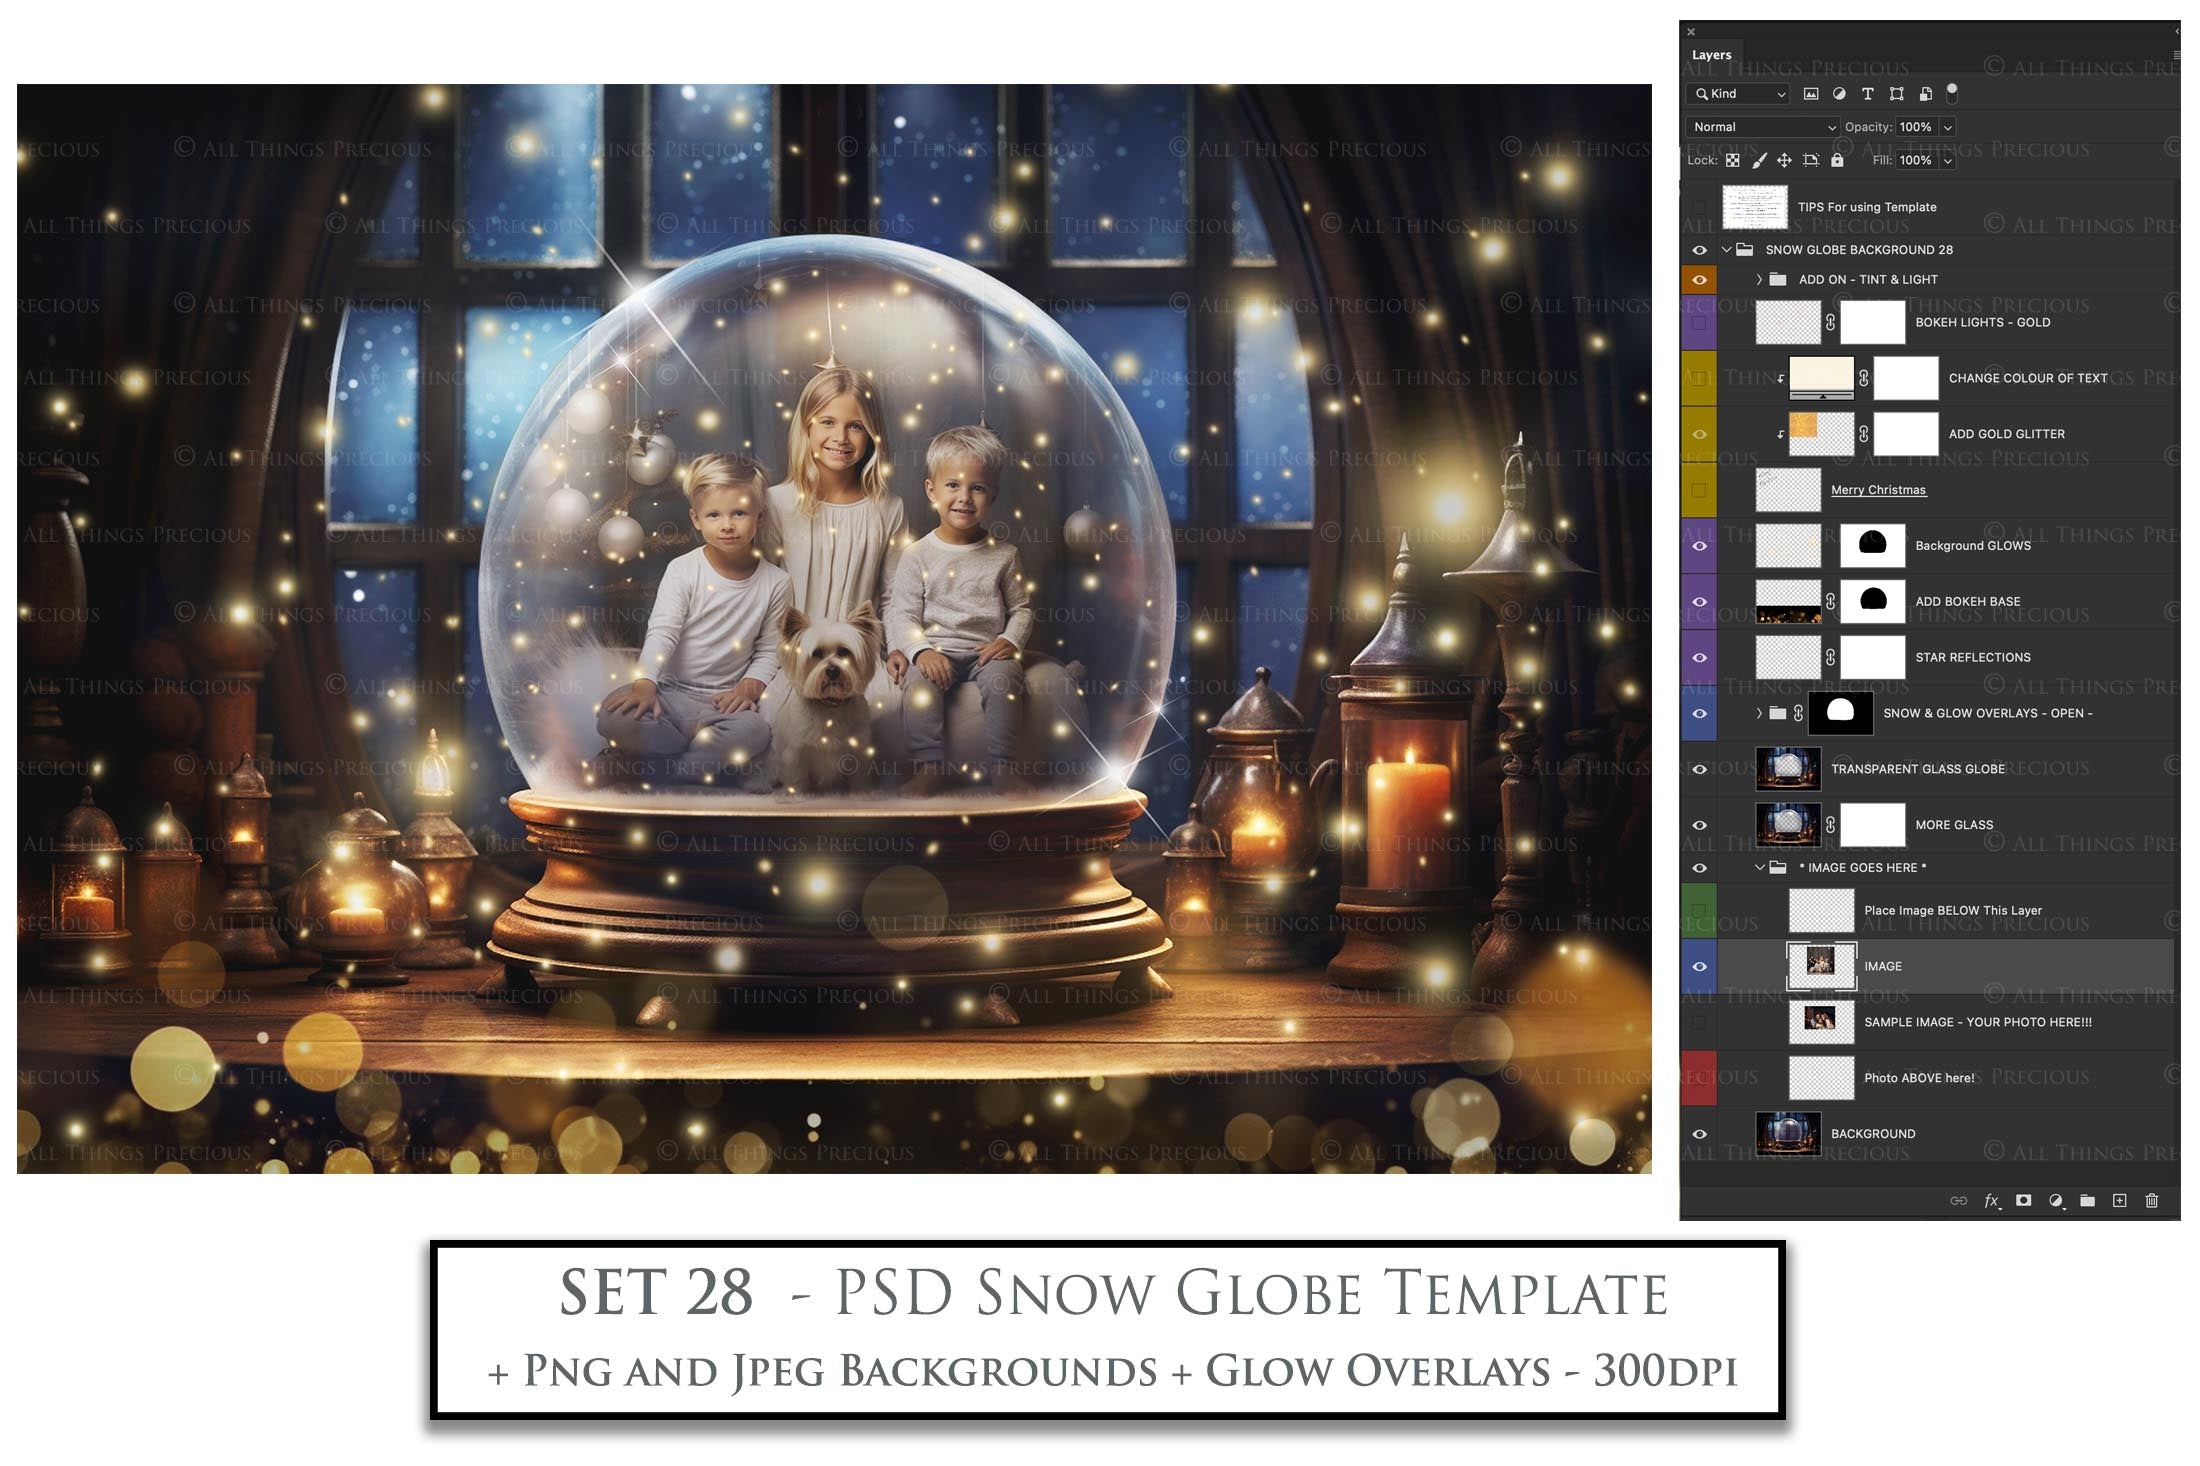 Digital Snow Globe Background. Png snow and glow overlays with PSD Template. The globe is transparent, perfect for adding your own images and retain the glass effect. Nutcracker Mouse Christmas. The file is 6000 x 4000, 300dpi. Png Included. Use for Xmas edits, Photography, Card Crafts, Scrapbooking. ATP Textures